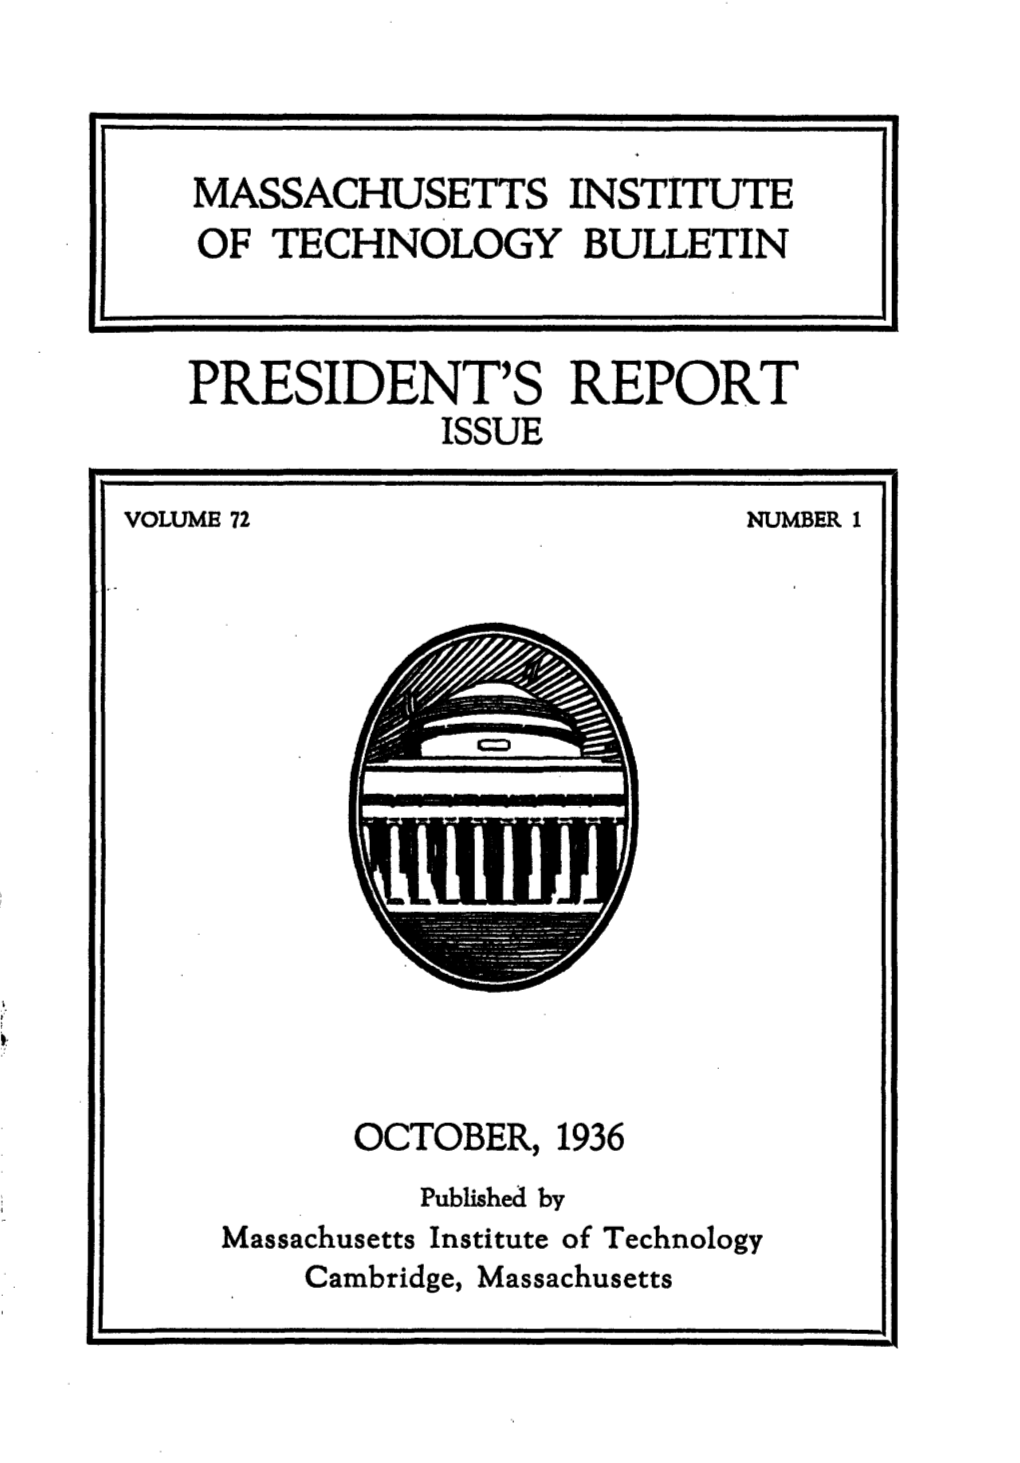 President's Report Issue I Volume 72 Number 1